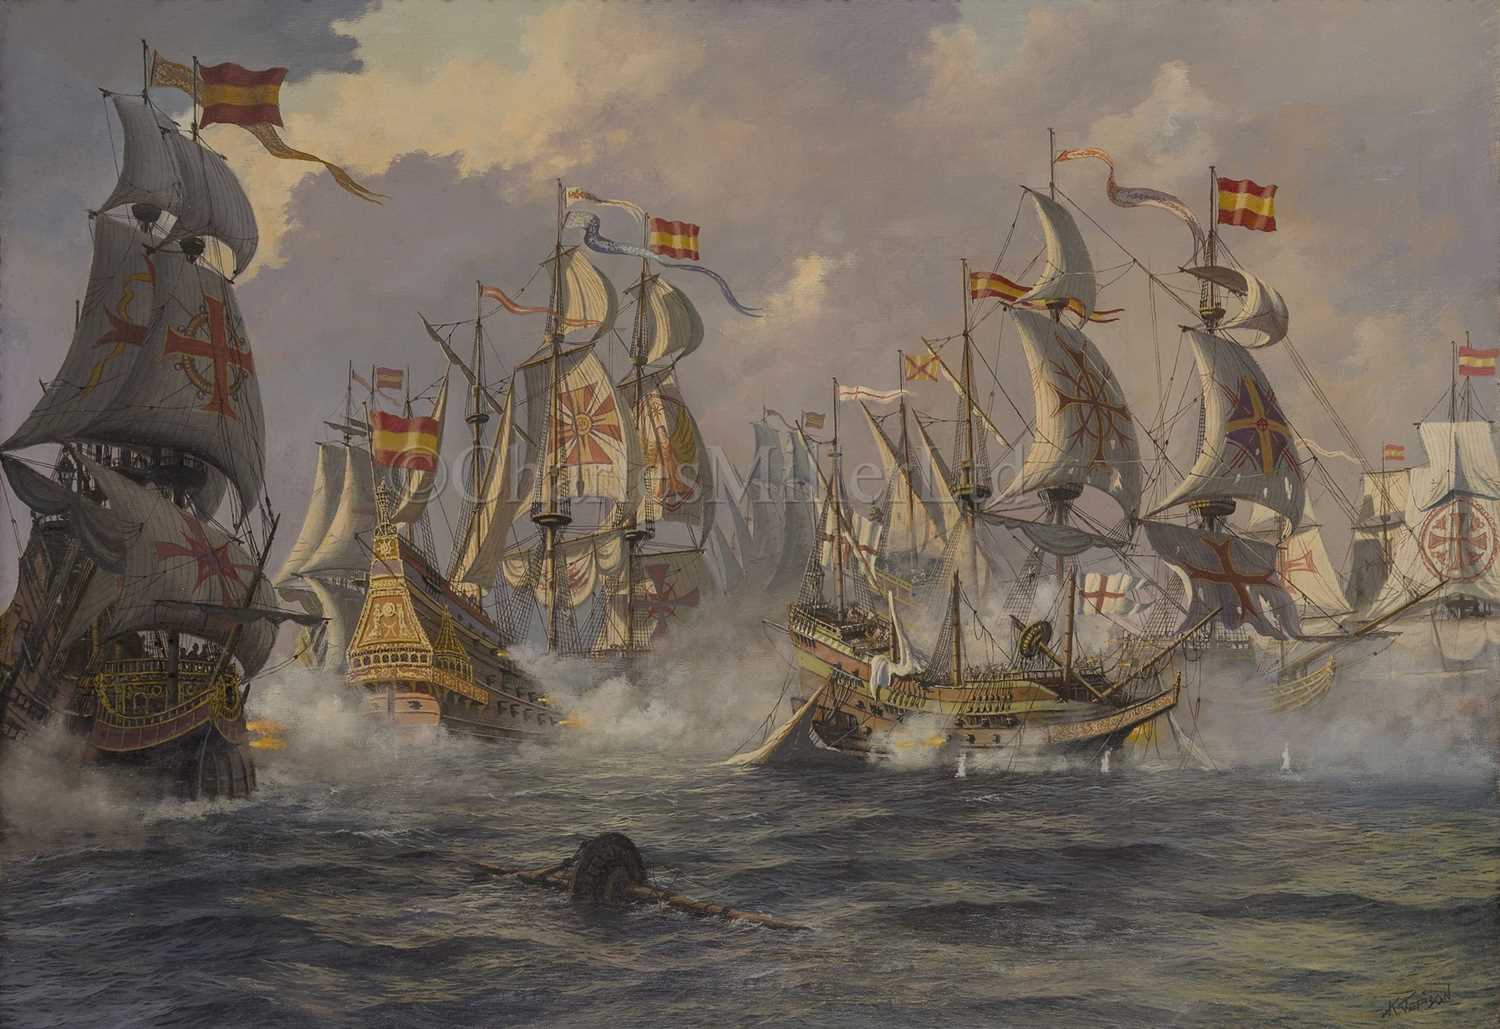 Lot 36 - δ KENNETH JEPSON (BRITISH, 1932-1998): Sir Richard Grenville's 'Revenge' in her last fight off the Azores, 31st August, 1591